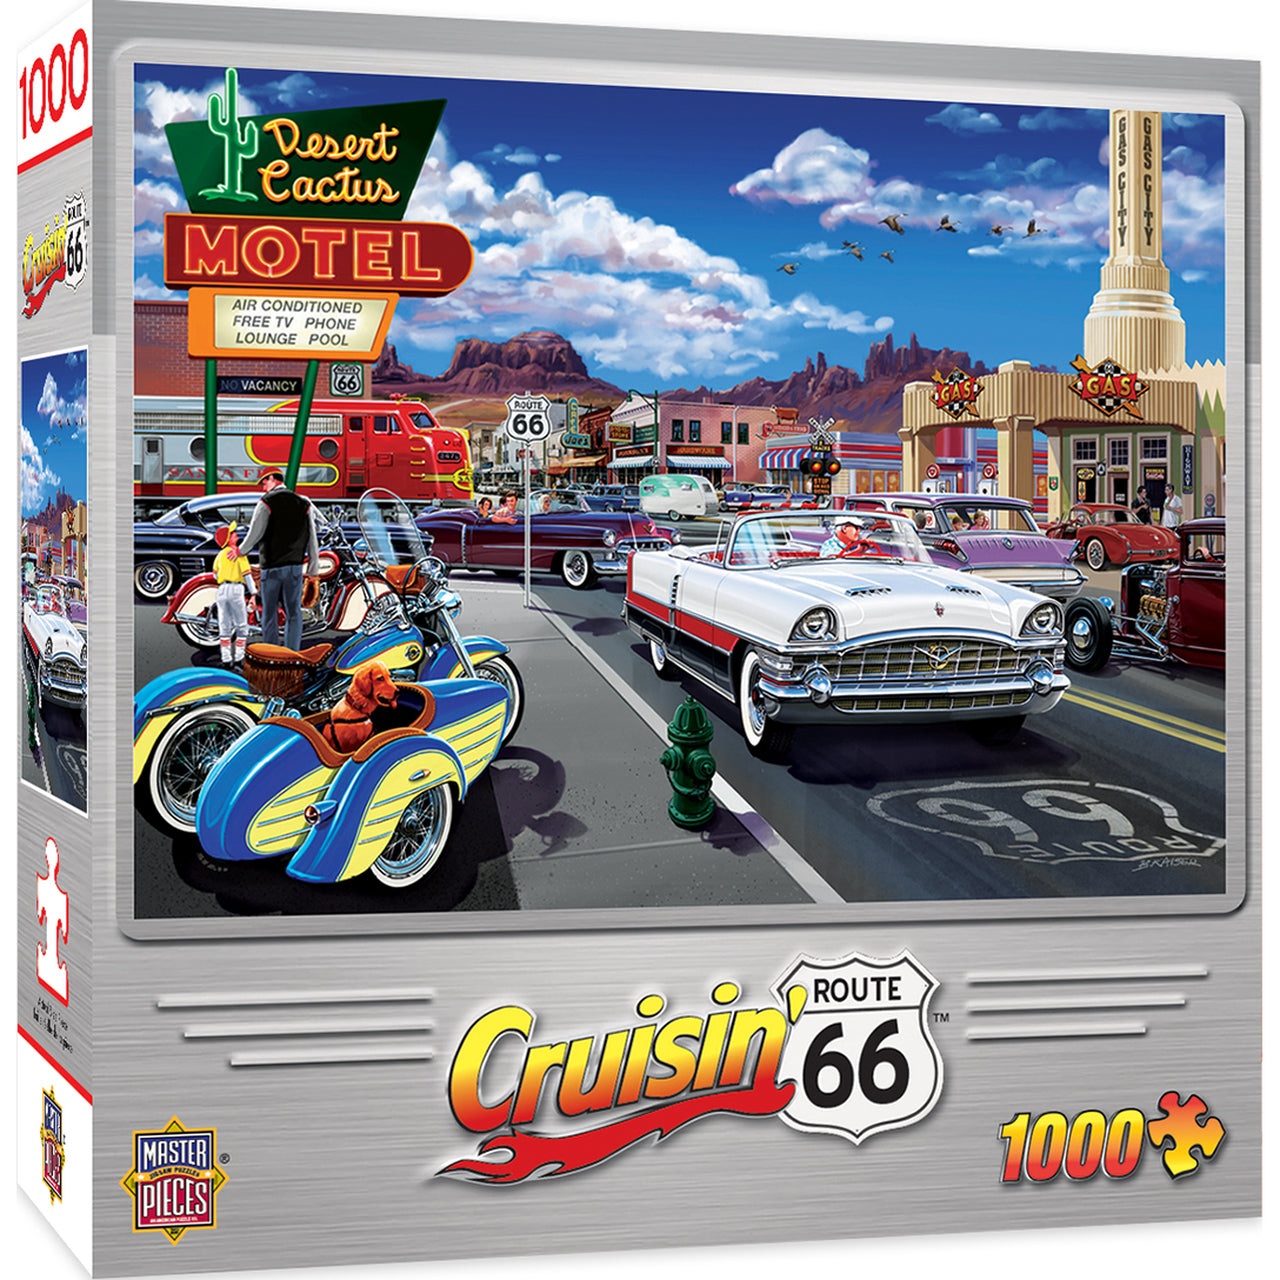 Cruisin' Route 66 - Drive Through on Rt. 66 1000 Piece Jigsaw Puzzle by Masterpieces